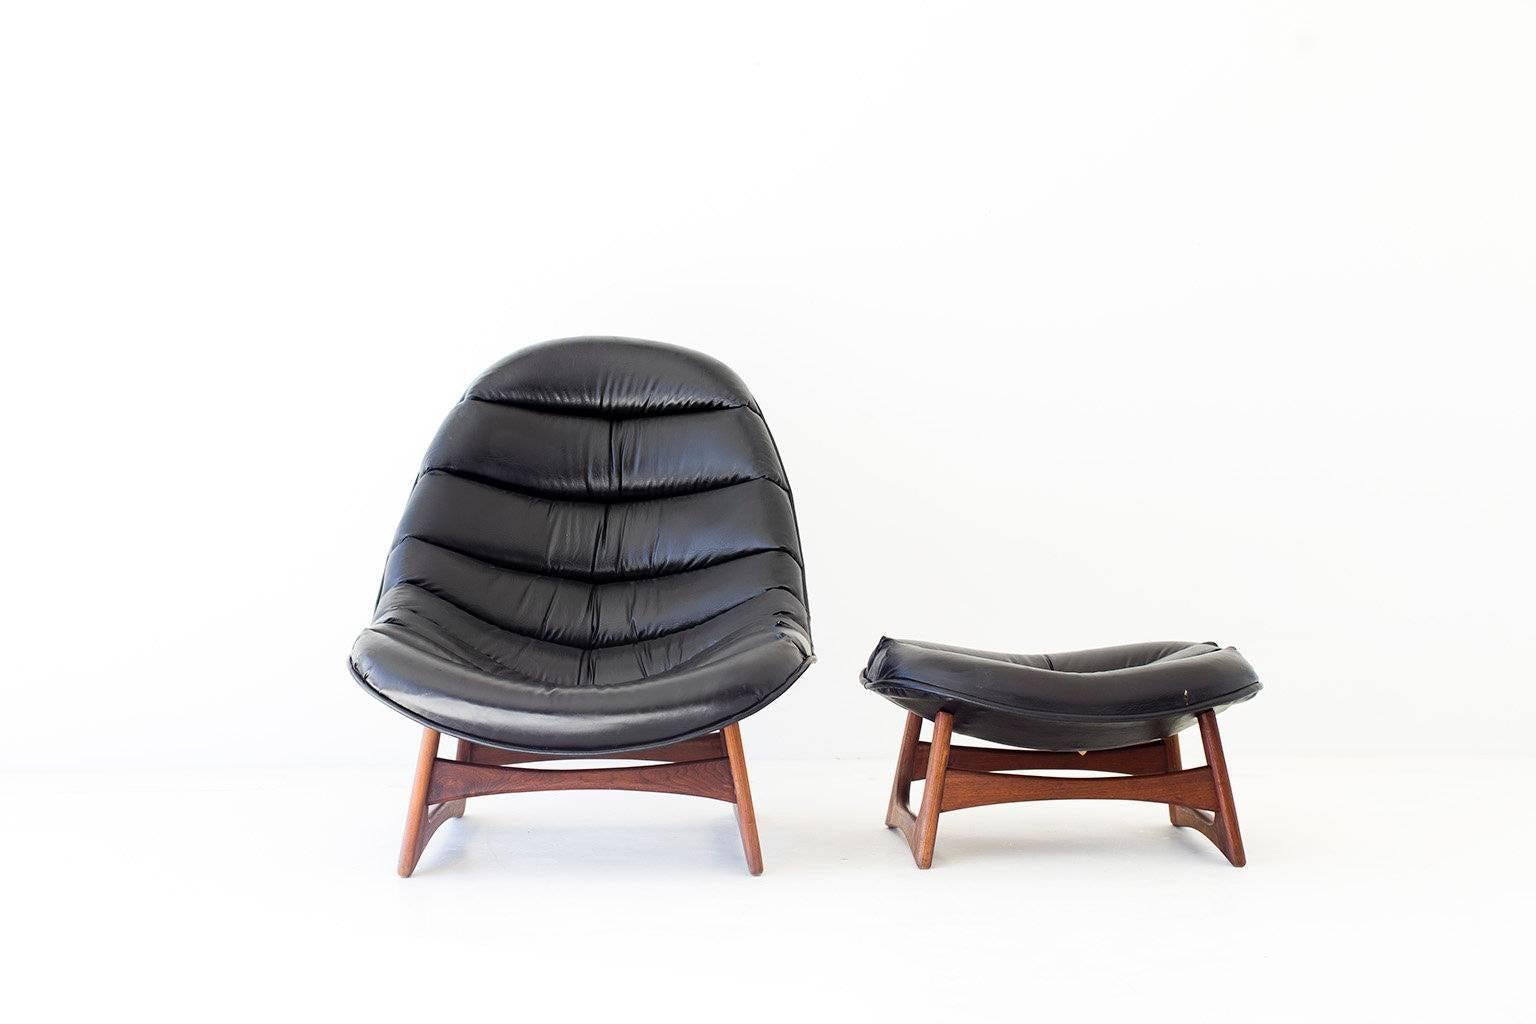 Walnut Adrian Pearsall Lounge Chair and Ottoman for Craft Associates Inc.